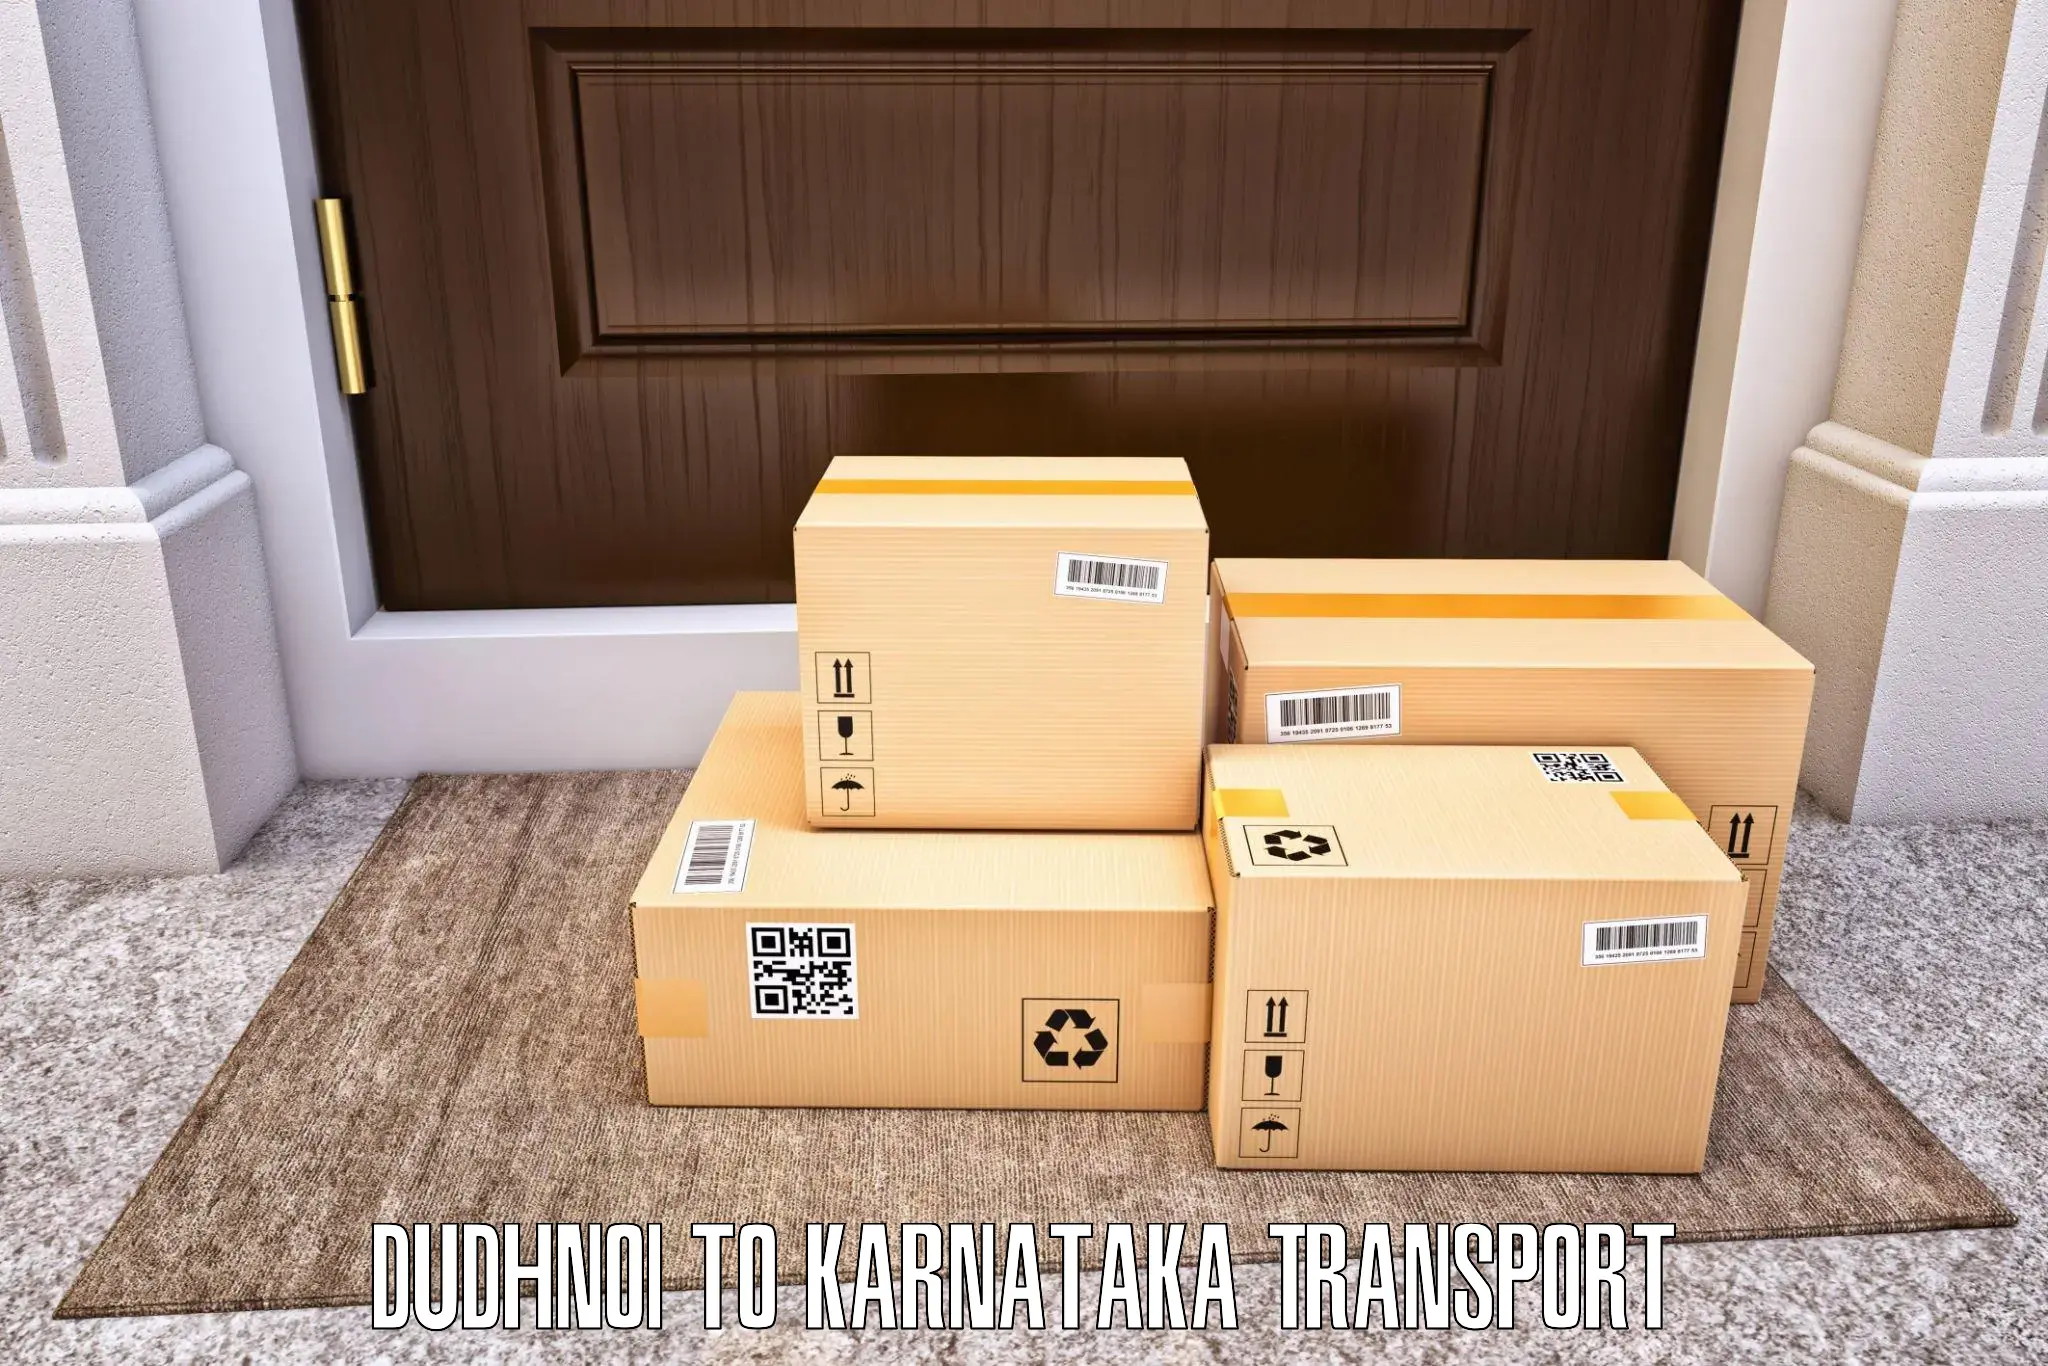 Container transportation services Dudhnoi to Kulshekar